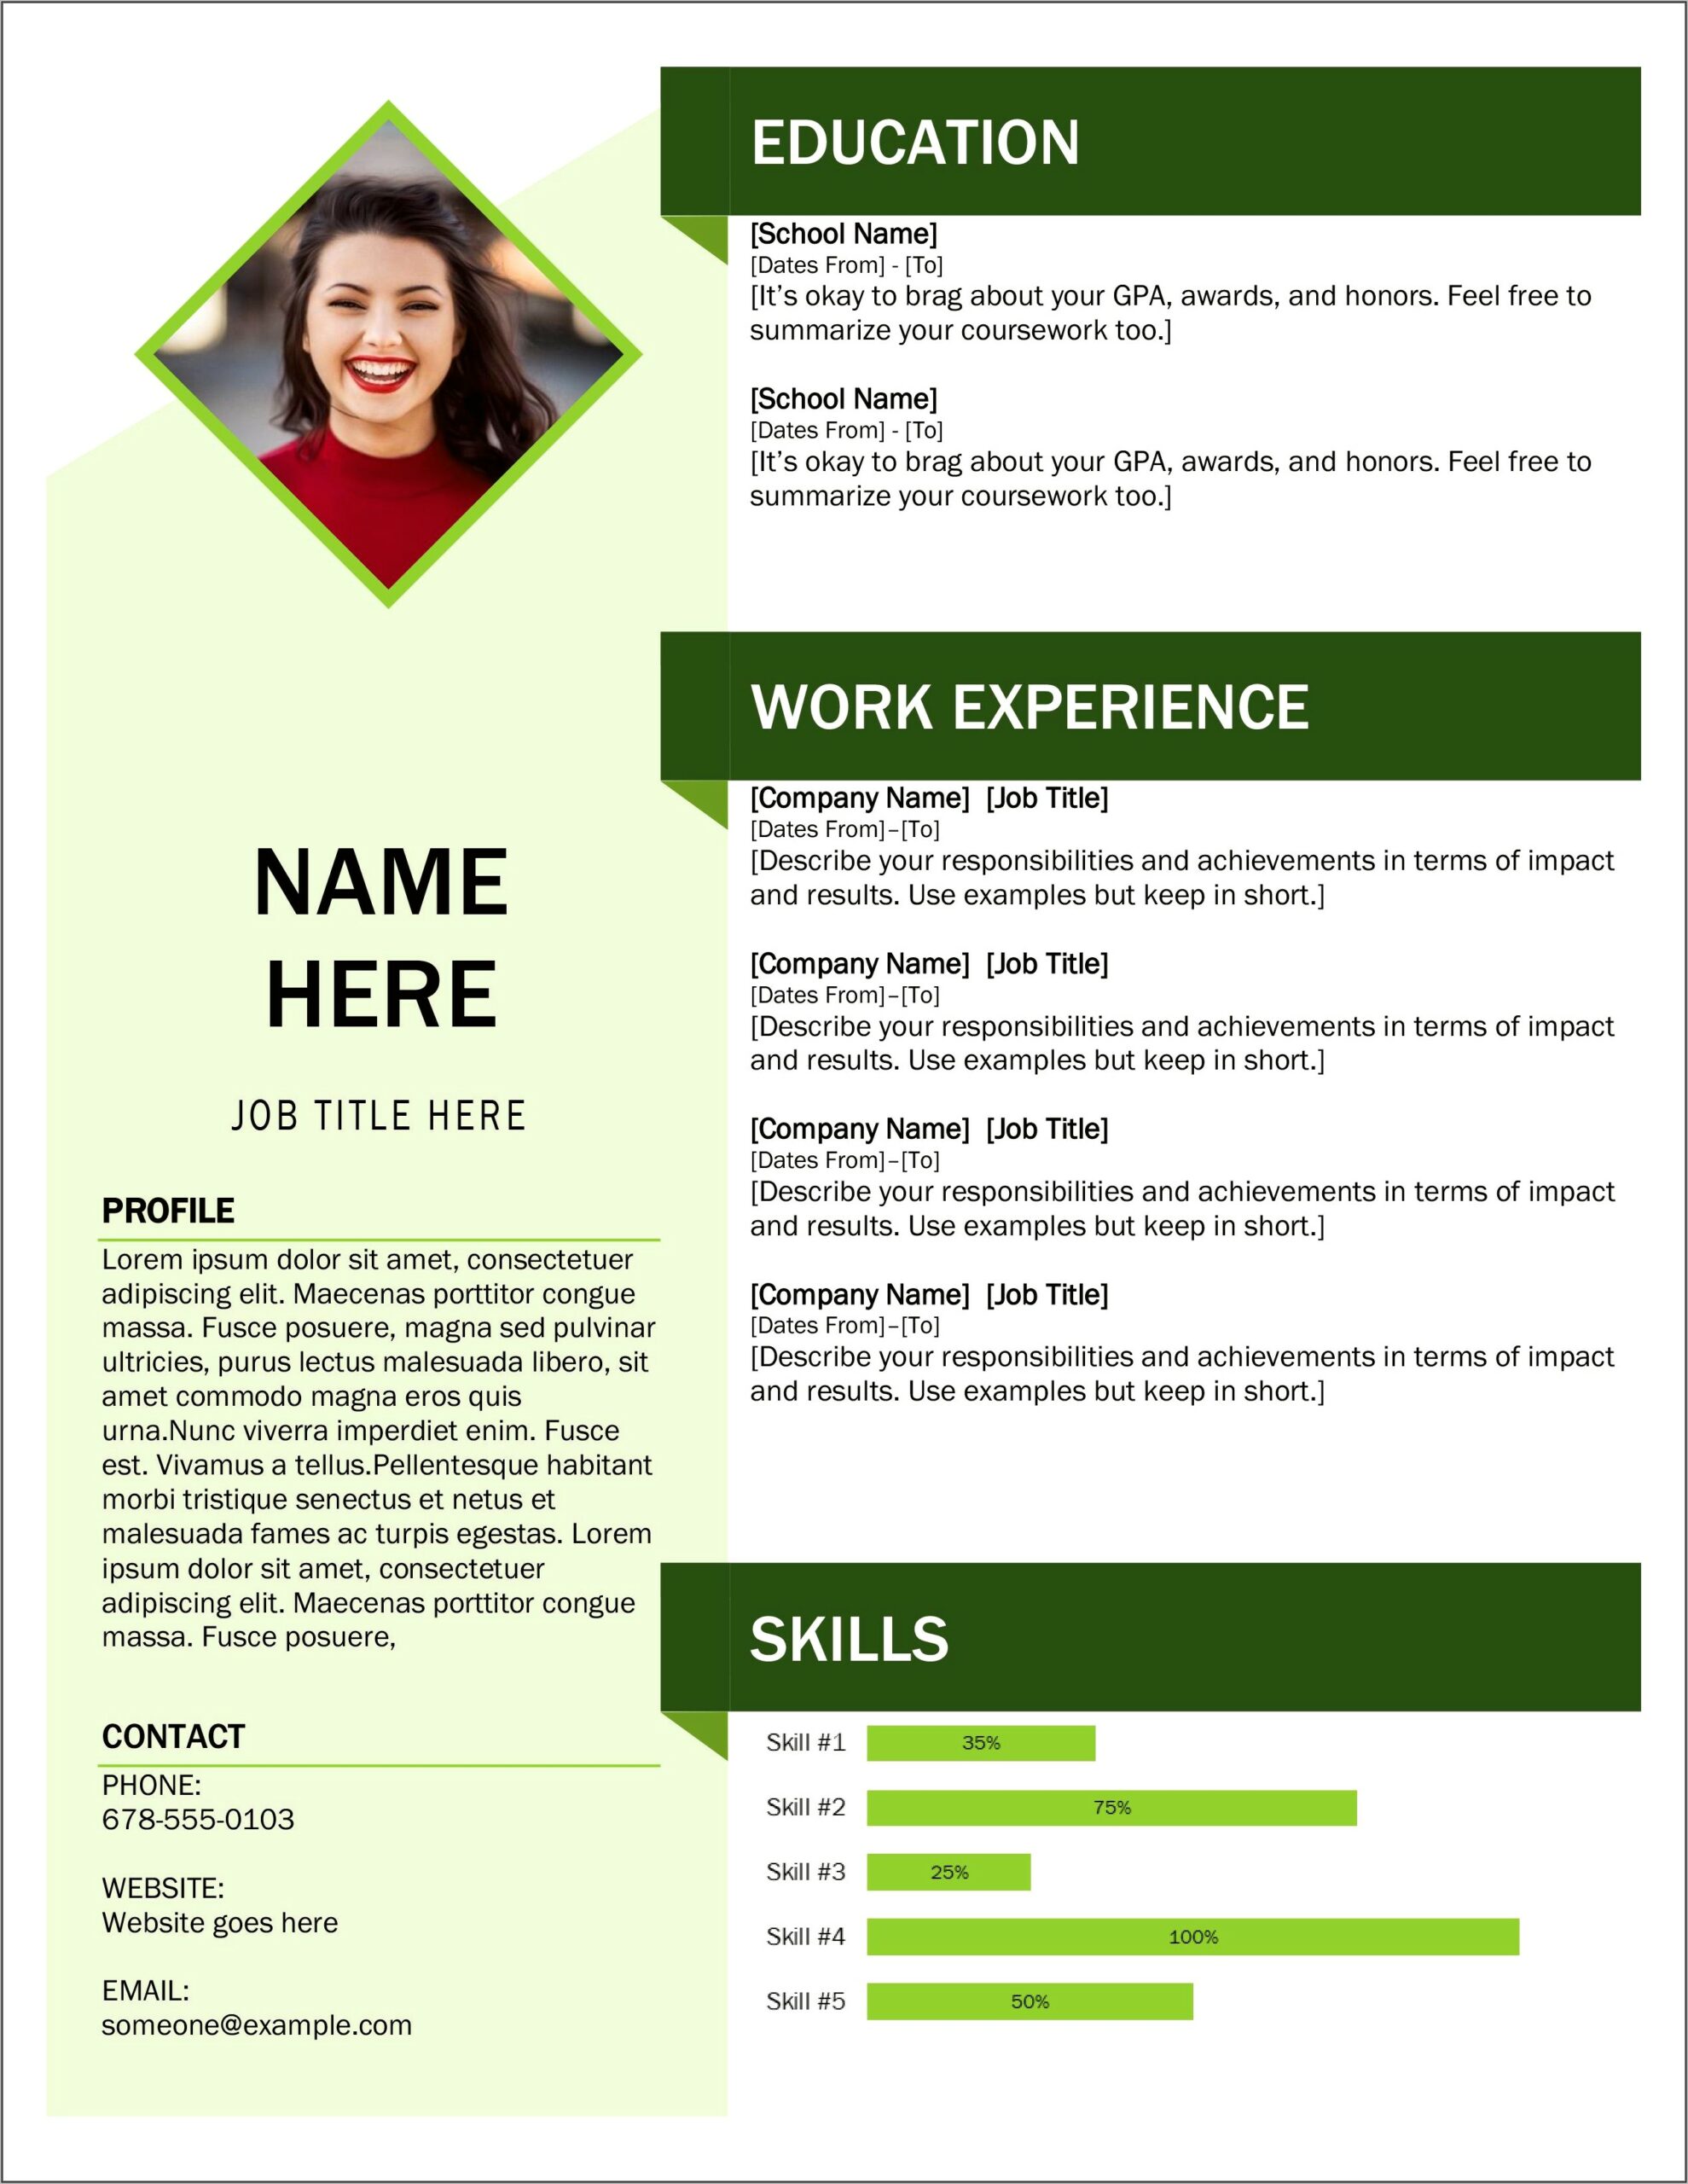 New Resume Format 2019 Examples